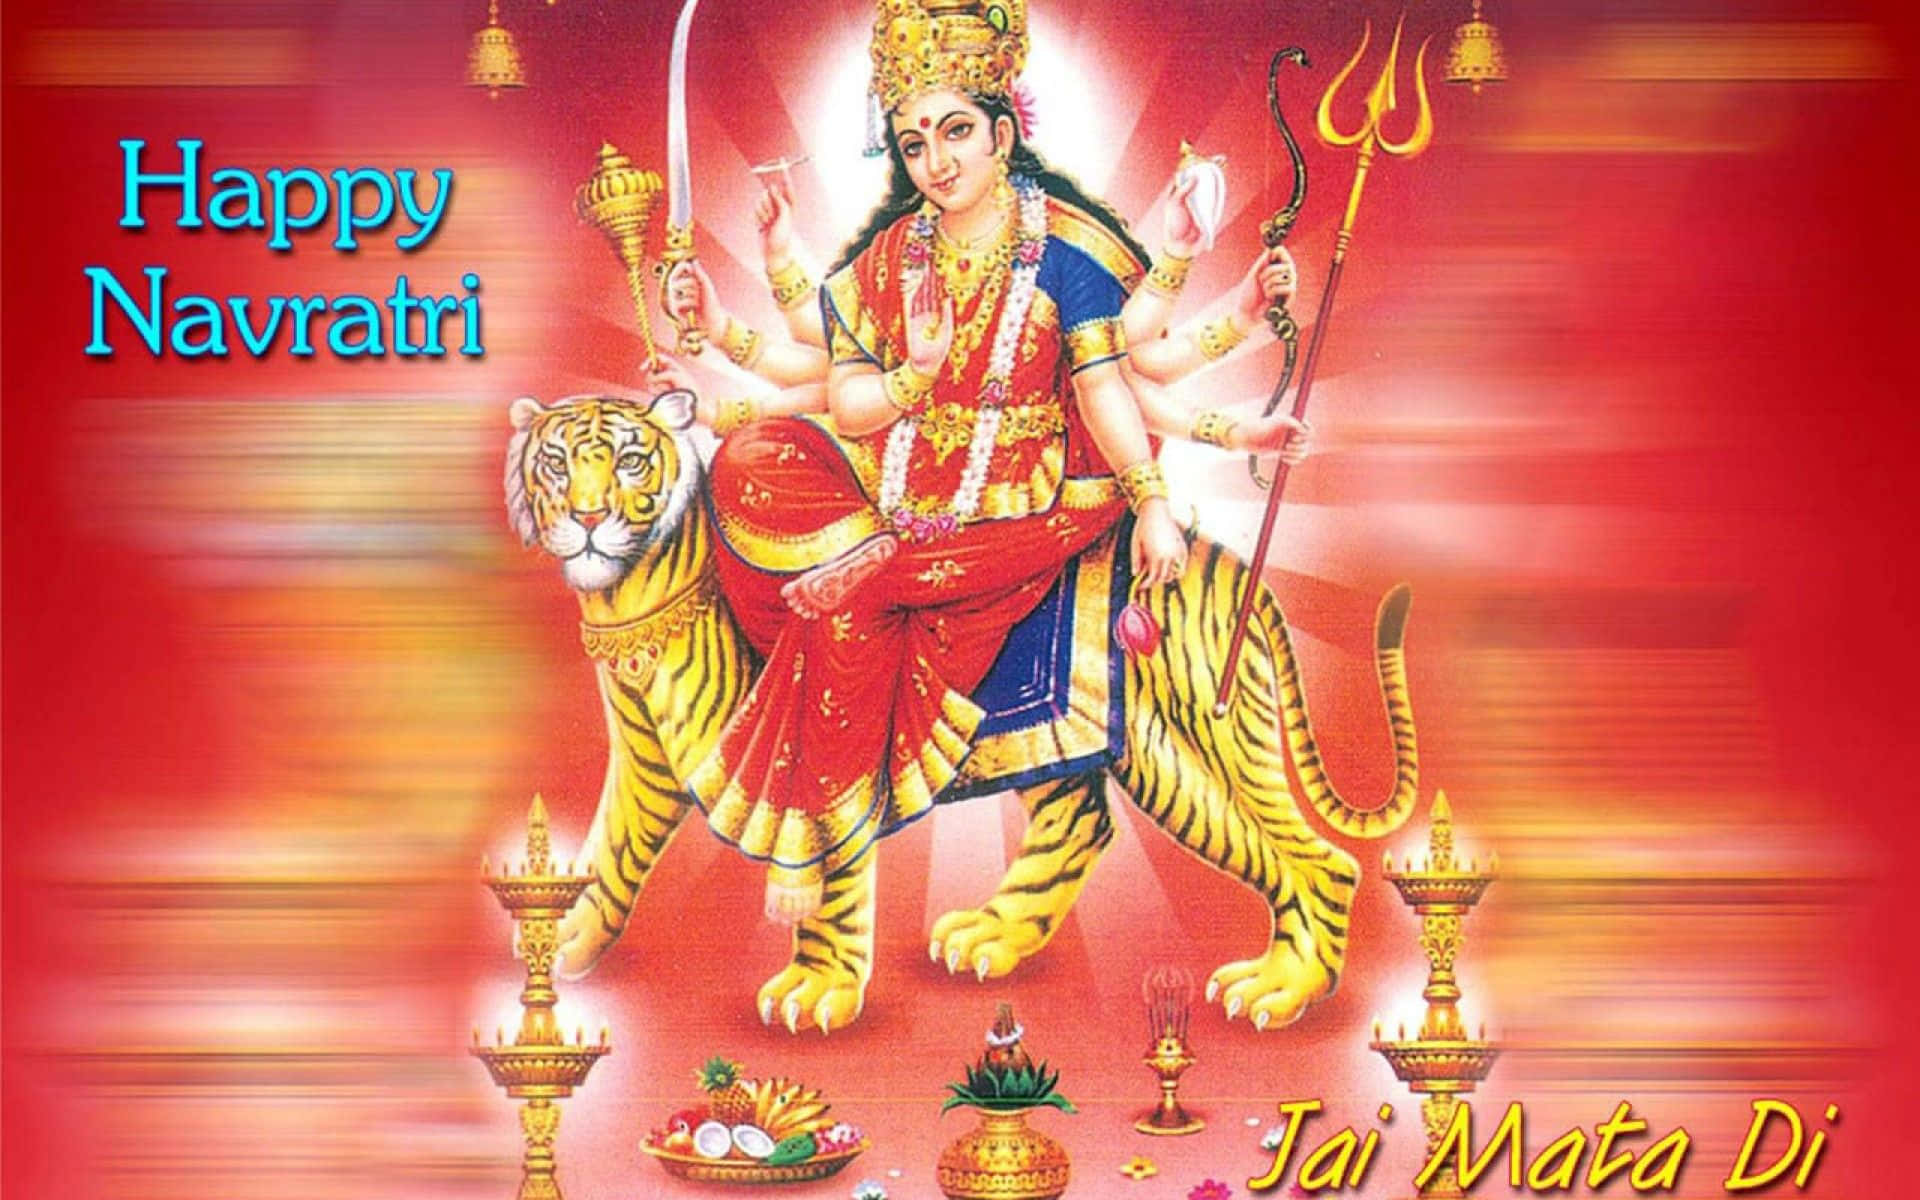 Happy Navratri Images, Hd Wallpapers, Hd Images, Hd Wallpapers, Hd Images, H